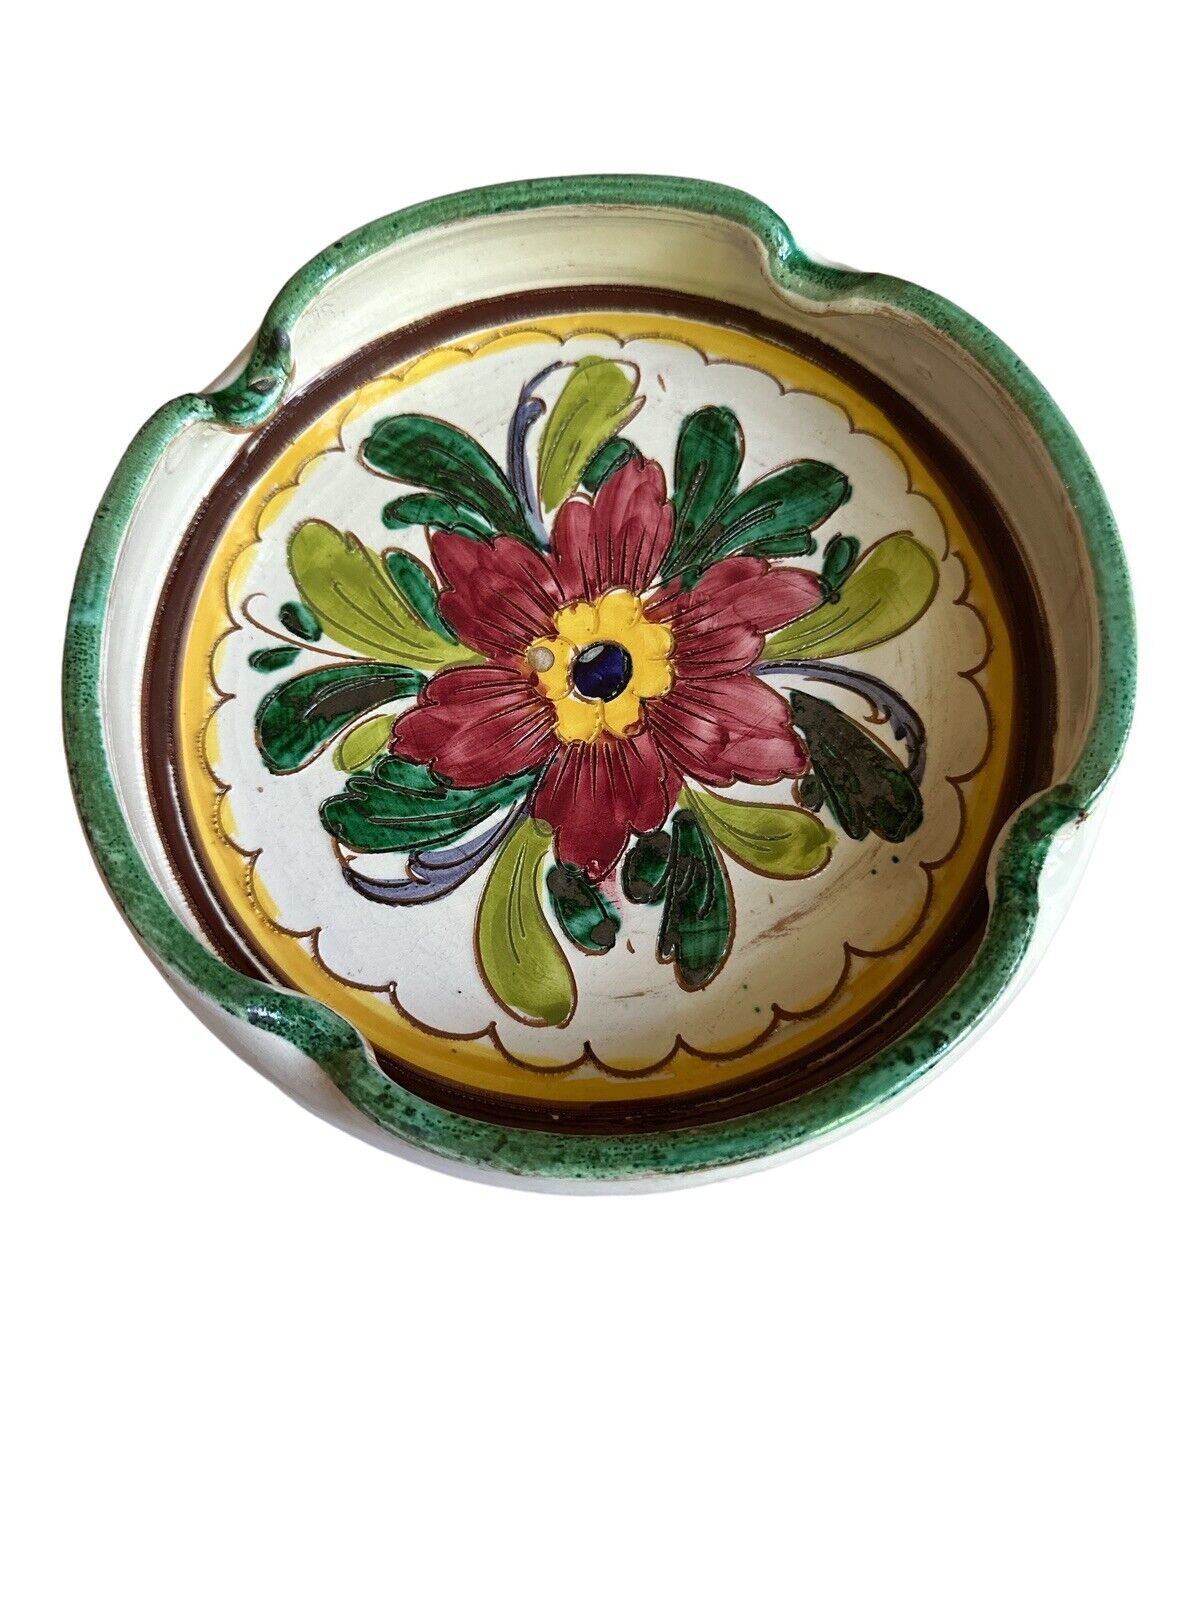 Vintage Floral Ceramic Ashtray Signed Italy 8.5” 